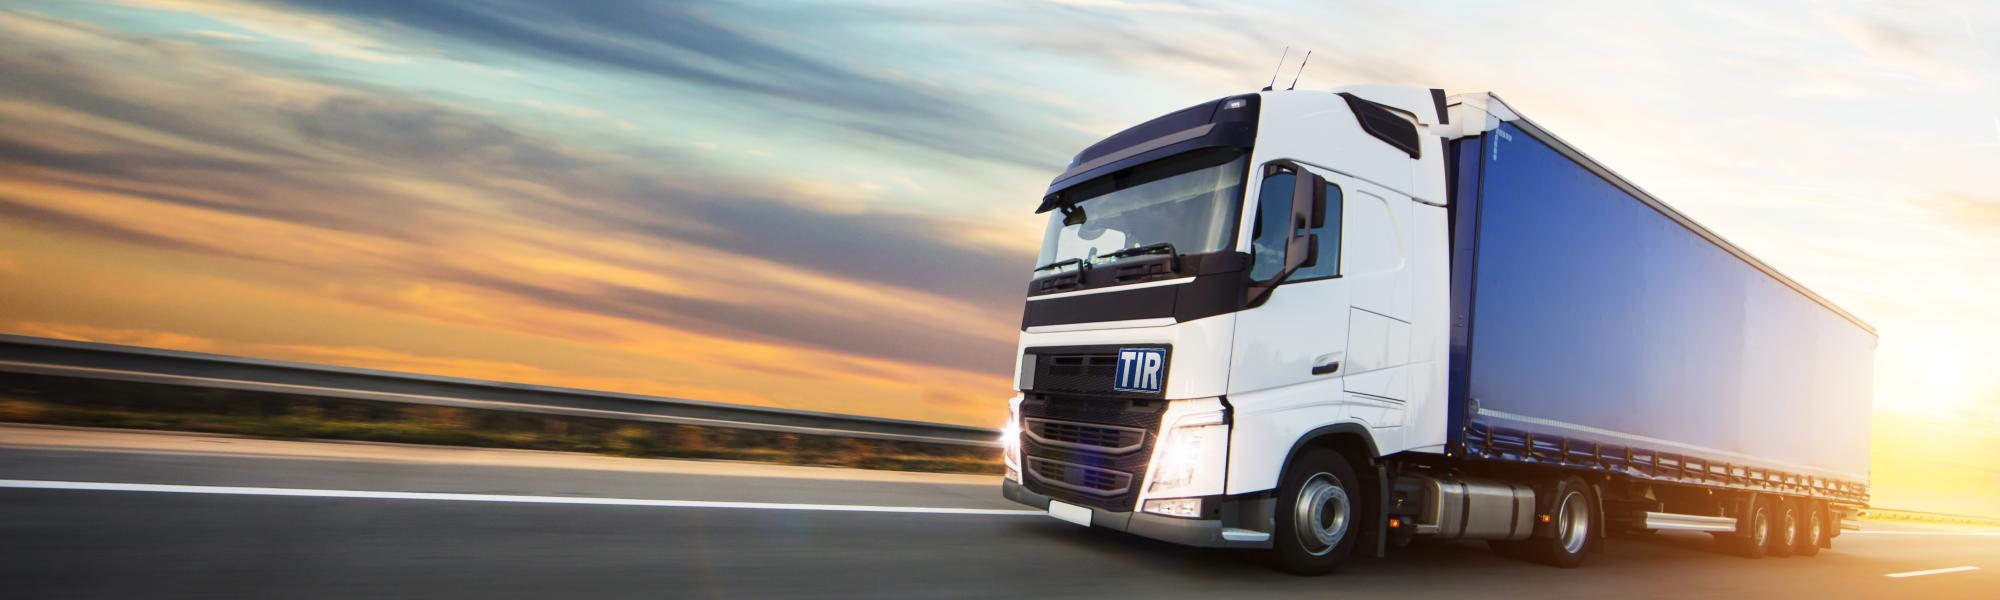 TIR: the simple and secure customs solution for UK-EU transports